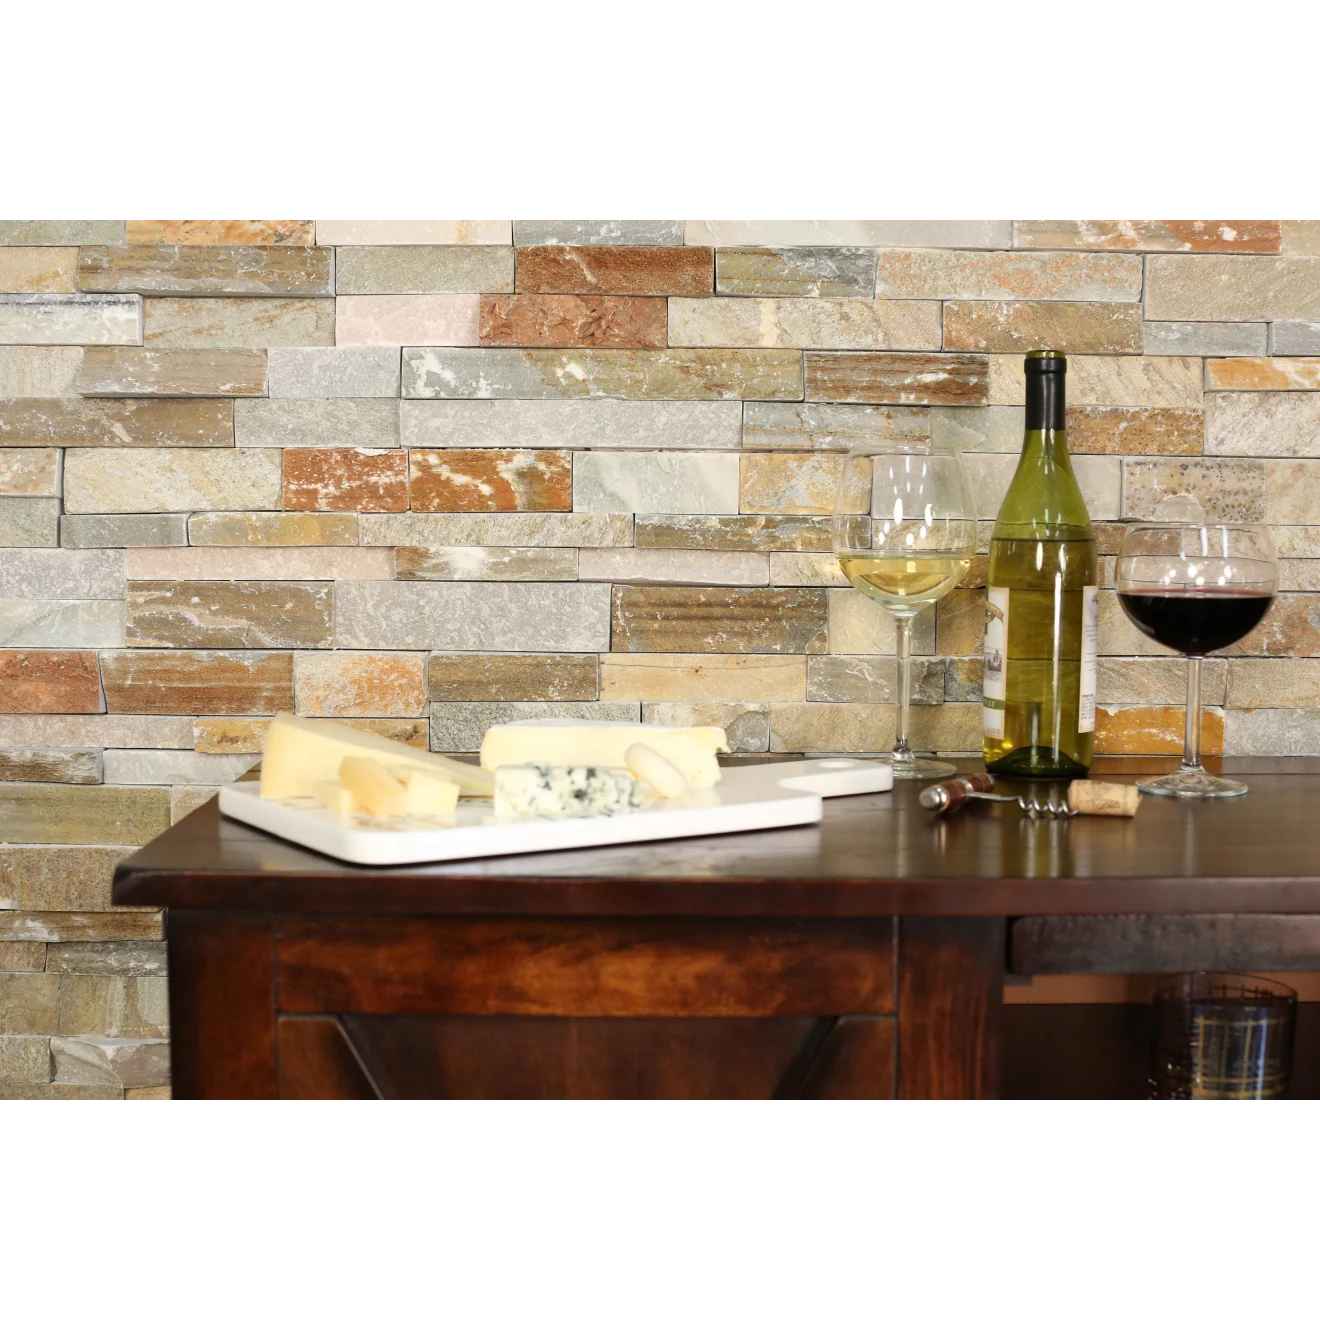 Split-face ledger wall application with a cabinet in front with an open, green, wine bottle, two wine glasses, and a plate of cheese. 